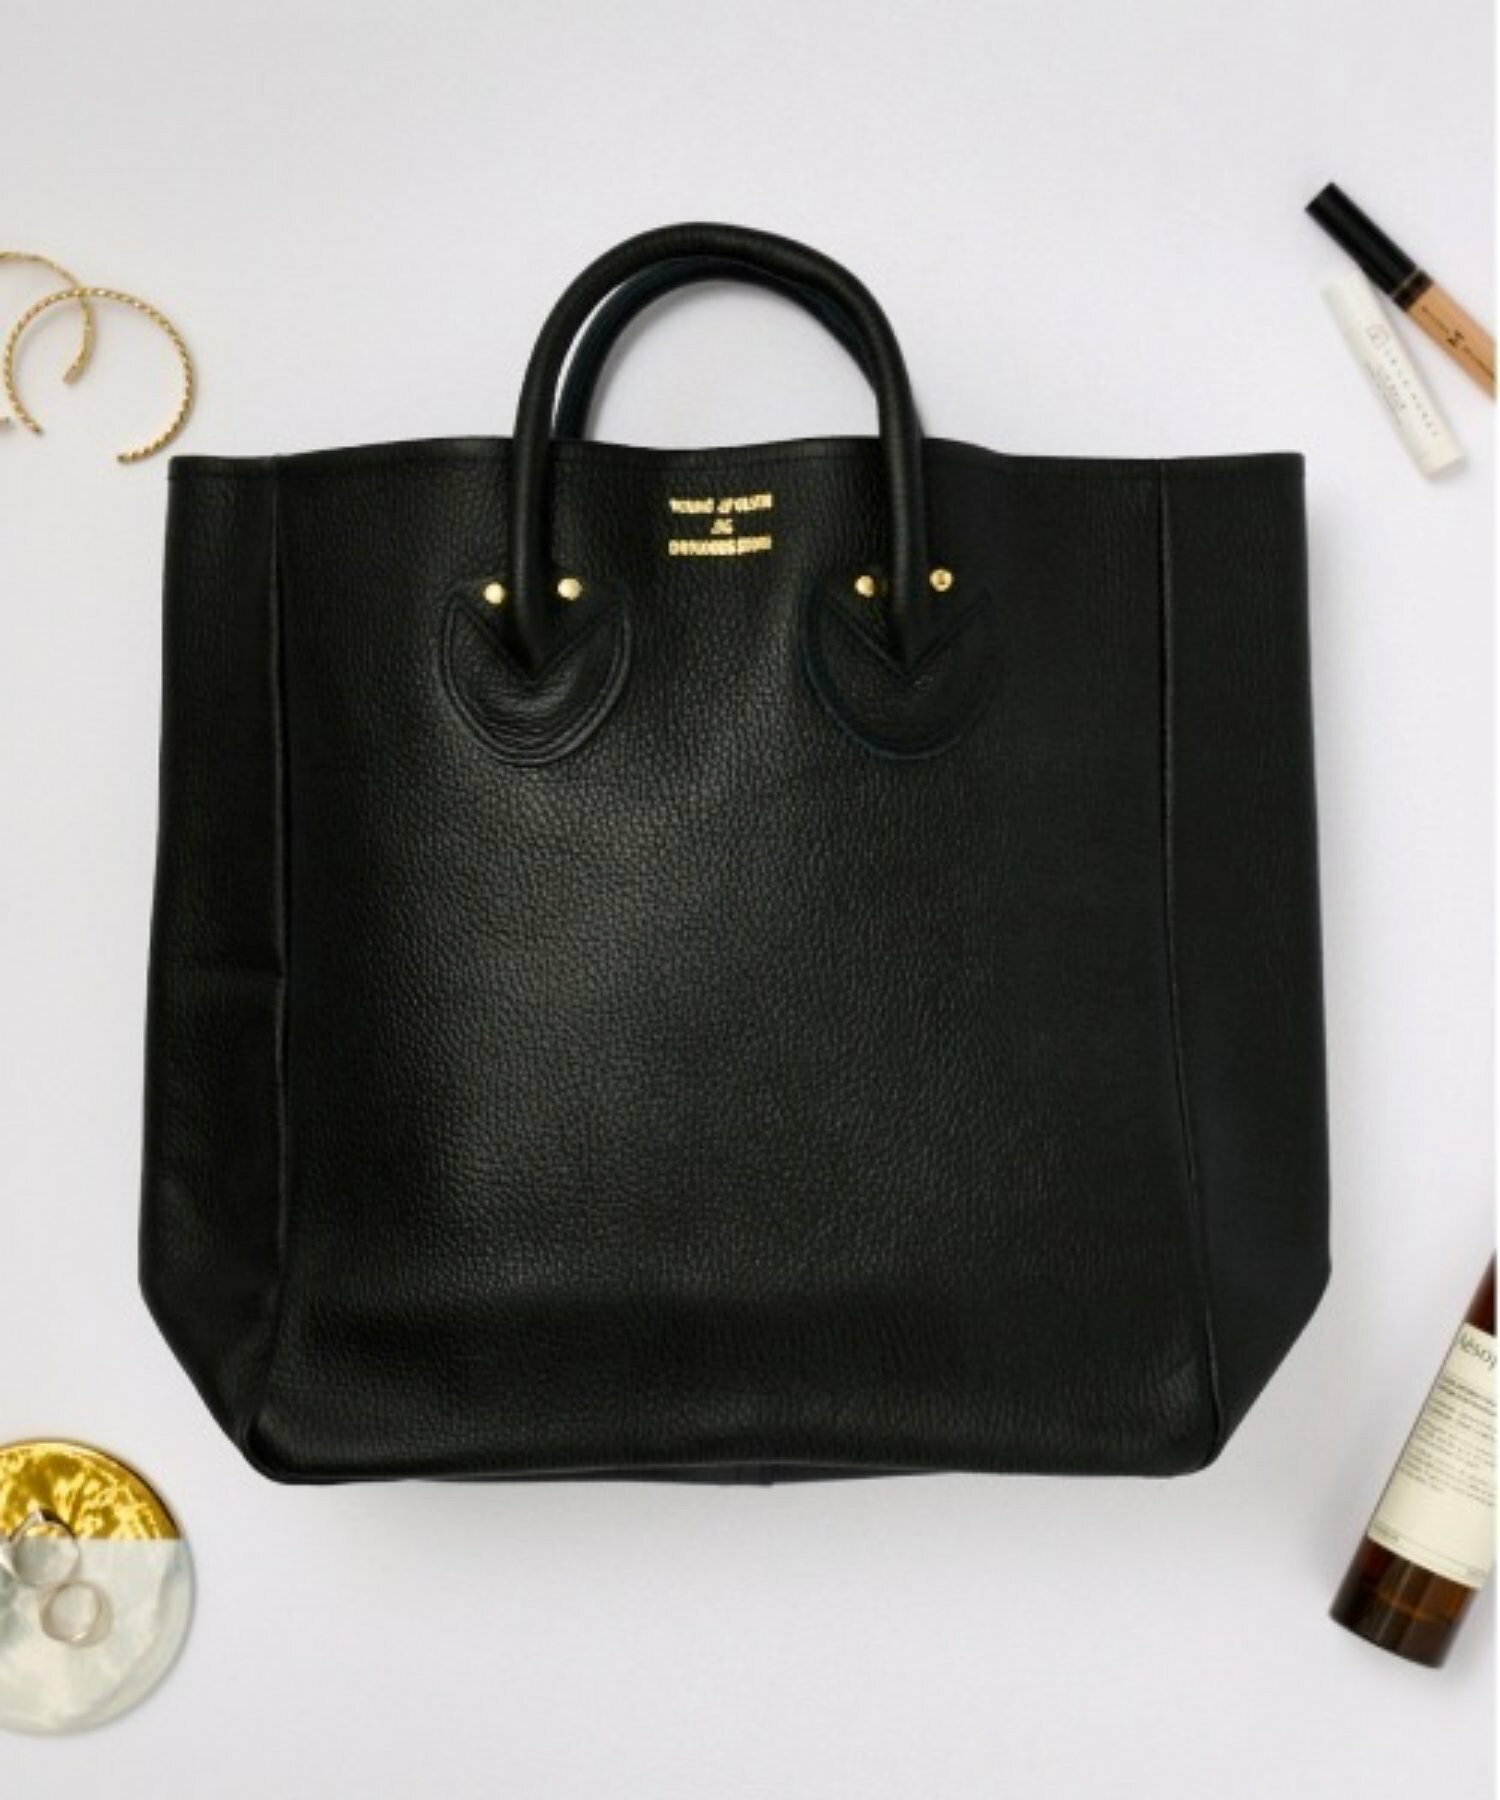 YOUNG&OLSEN/EMBOSSED LEATHER TOTE M ヤングアンドオルセン エンボス レザートート  バッグ 本革  M